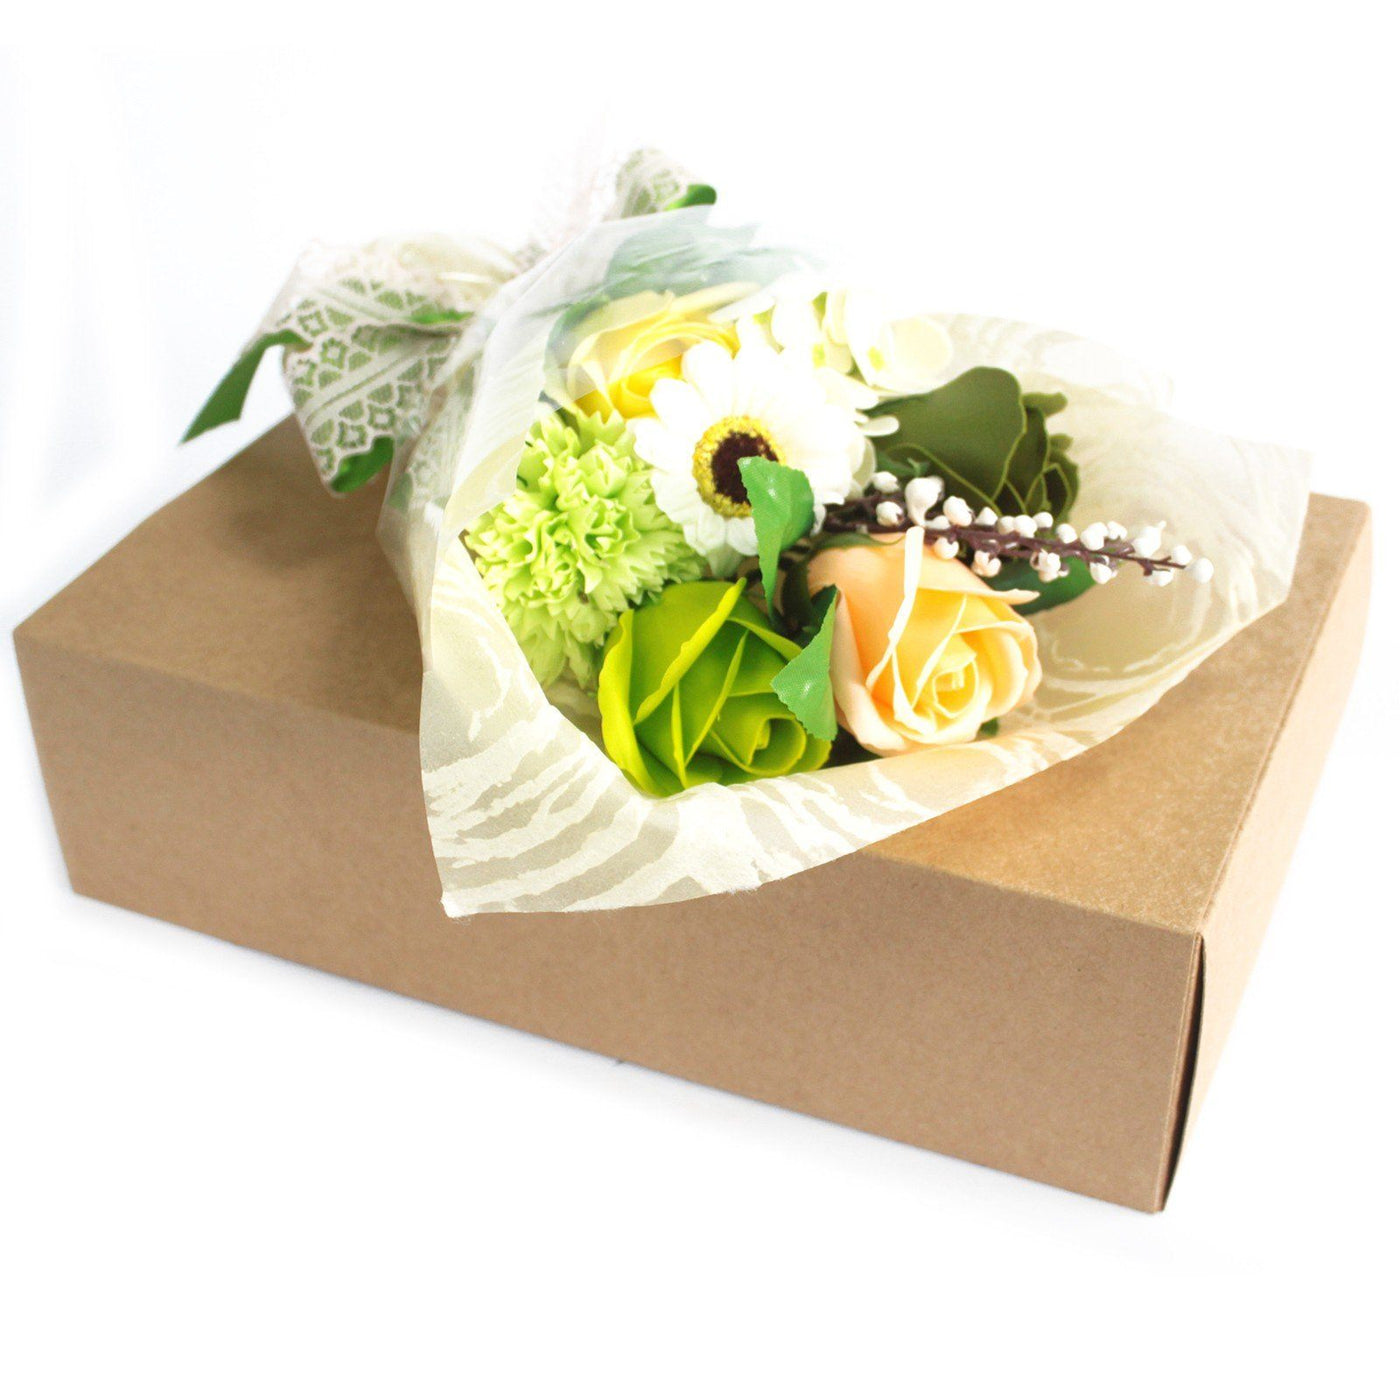 Gift Boxed Green Body Soap Flower Bouquet.